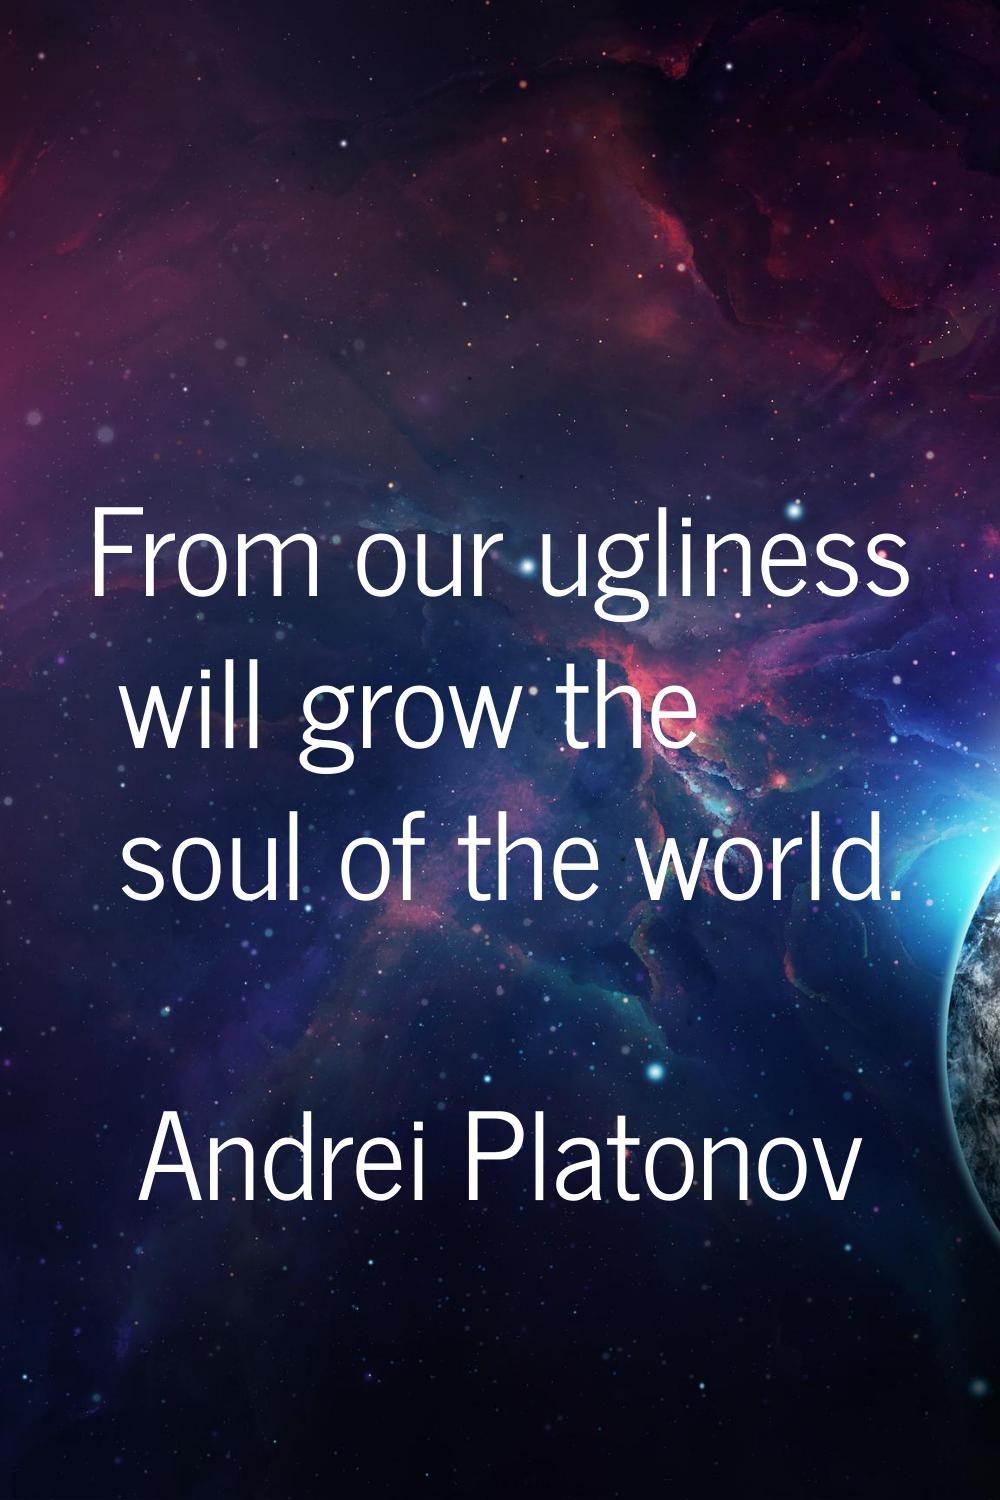 From our ugliness will grow the soul of the world.